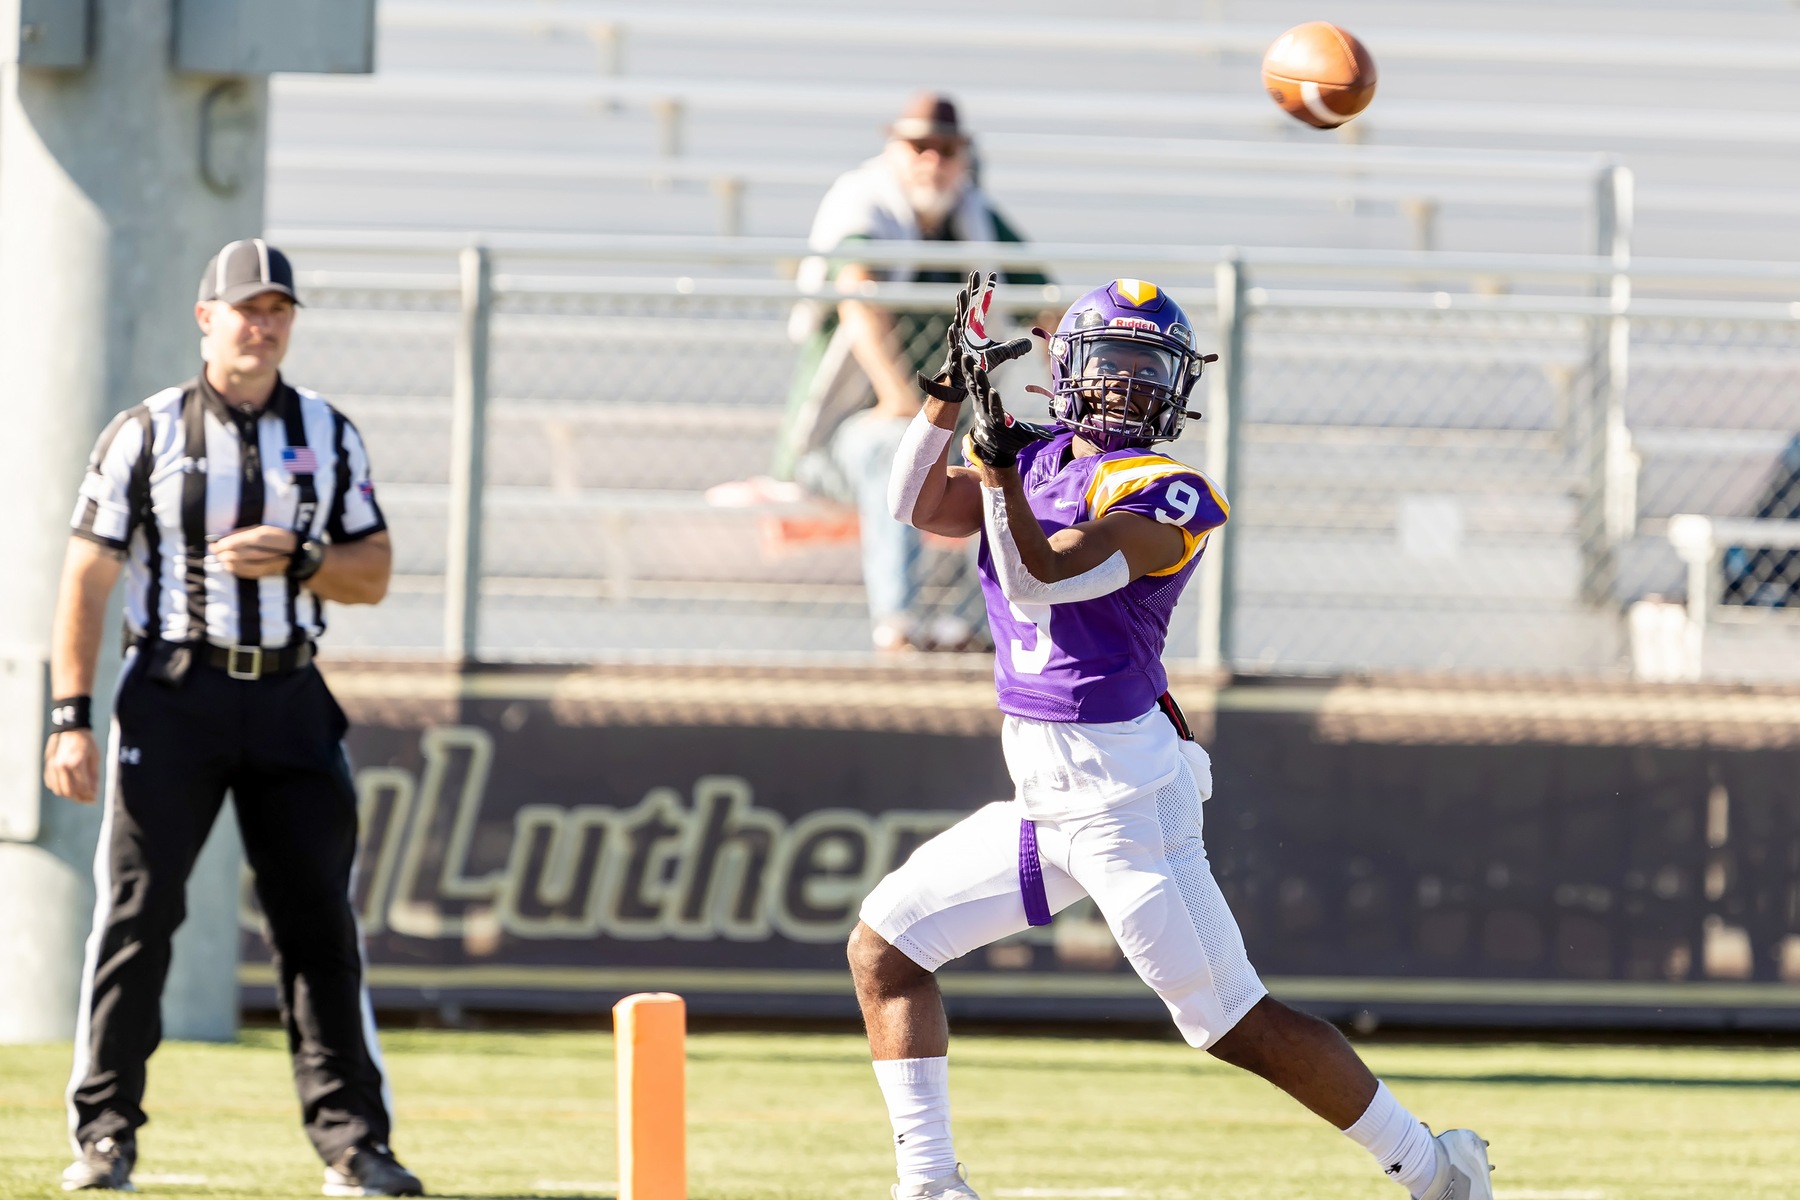 Cameron Jones recorded two touchdown receptions and added another touchdown off a punt return as CLU defeated Whittier 59-20. (Photo: Joe Bergman)